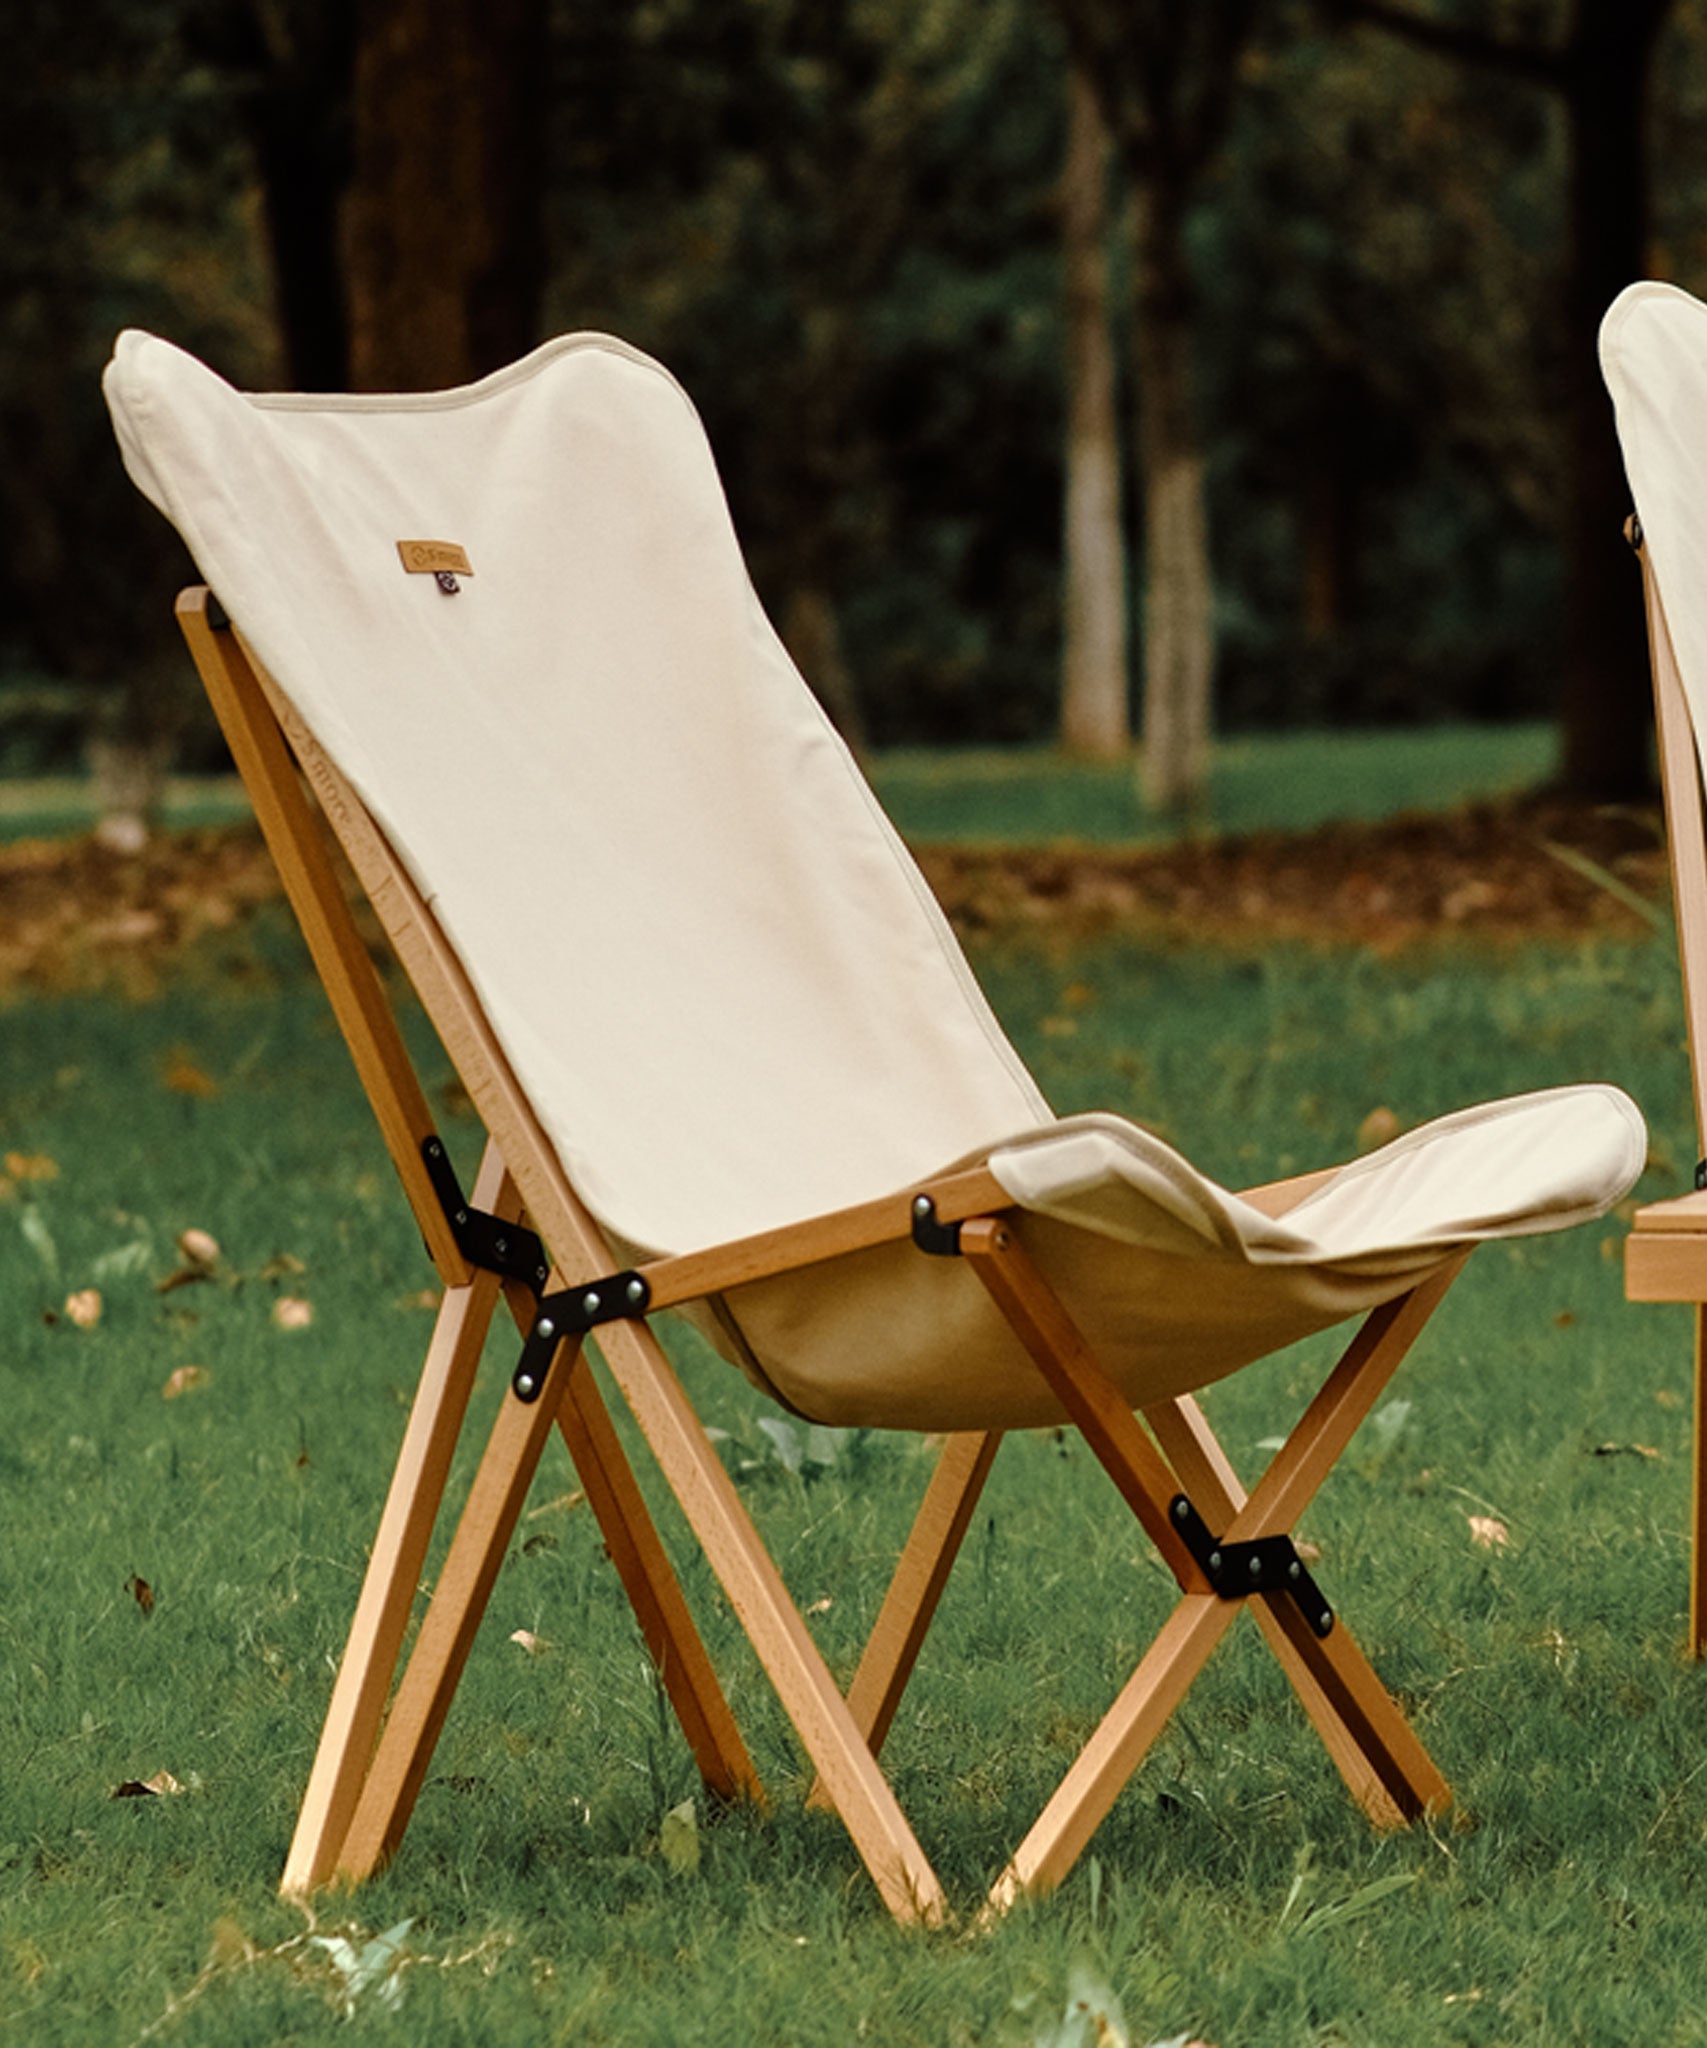 S'more(スモア) Woodie pack chair ウッドチェア 2台